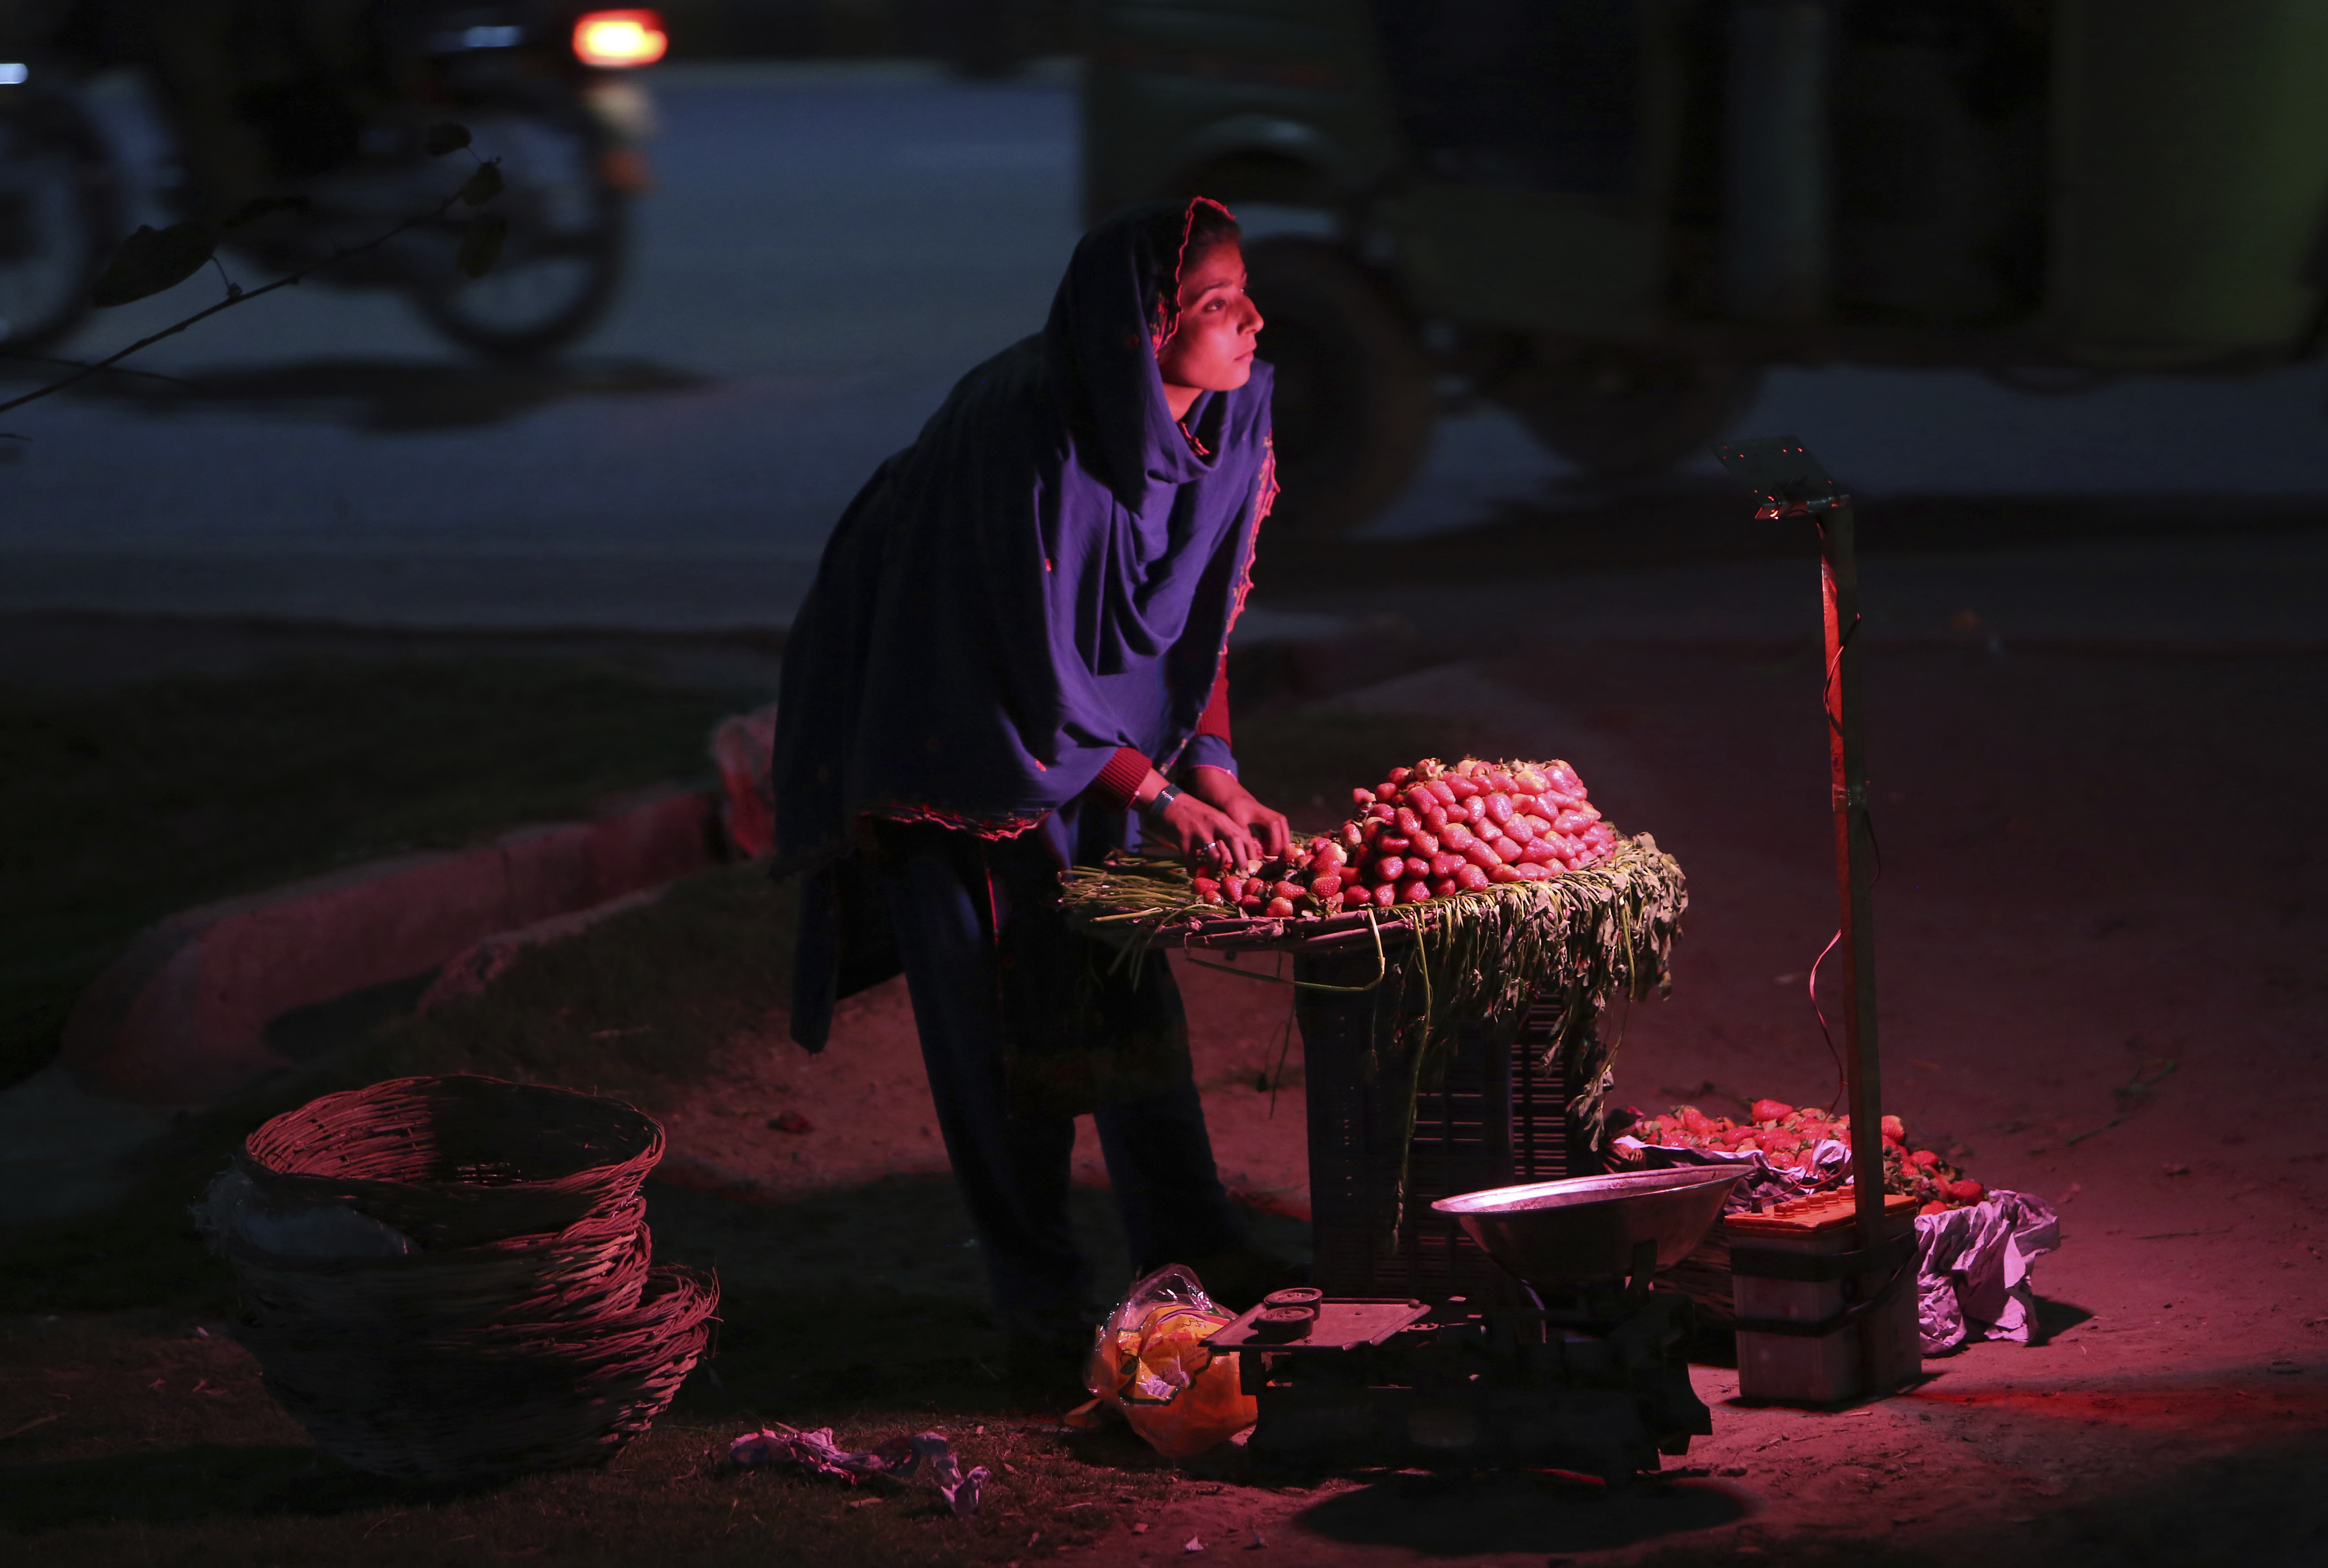 A Pakistani female vendor waits for customers to sell strawberries at a roadside in Lahore, Pakistan, Friday, March 15, 2019. (AP Photo/K.M. Chaudary)